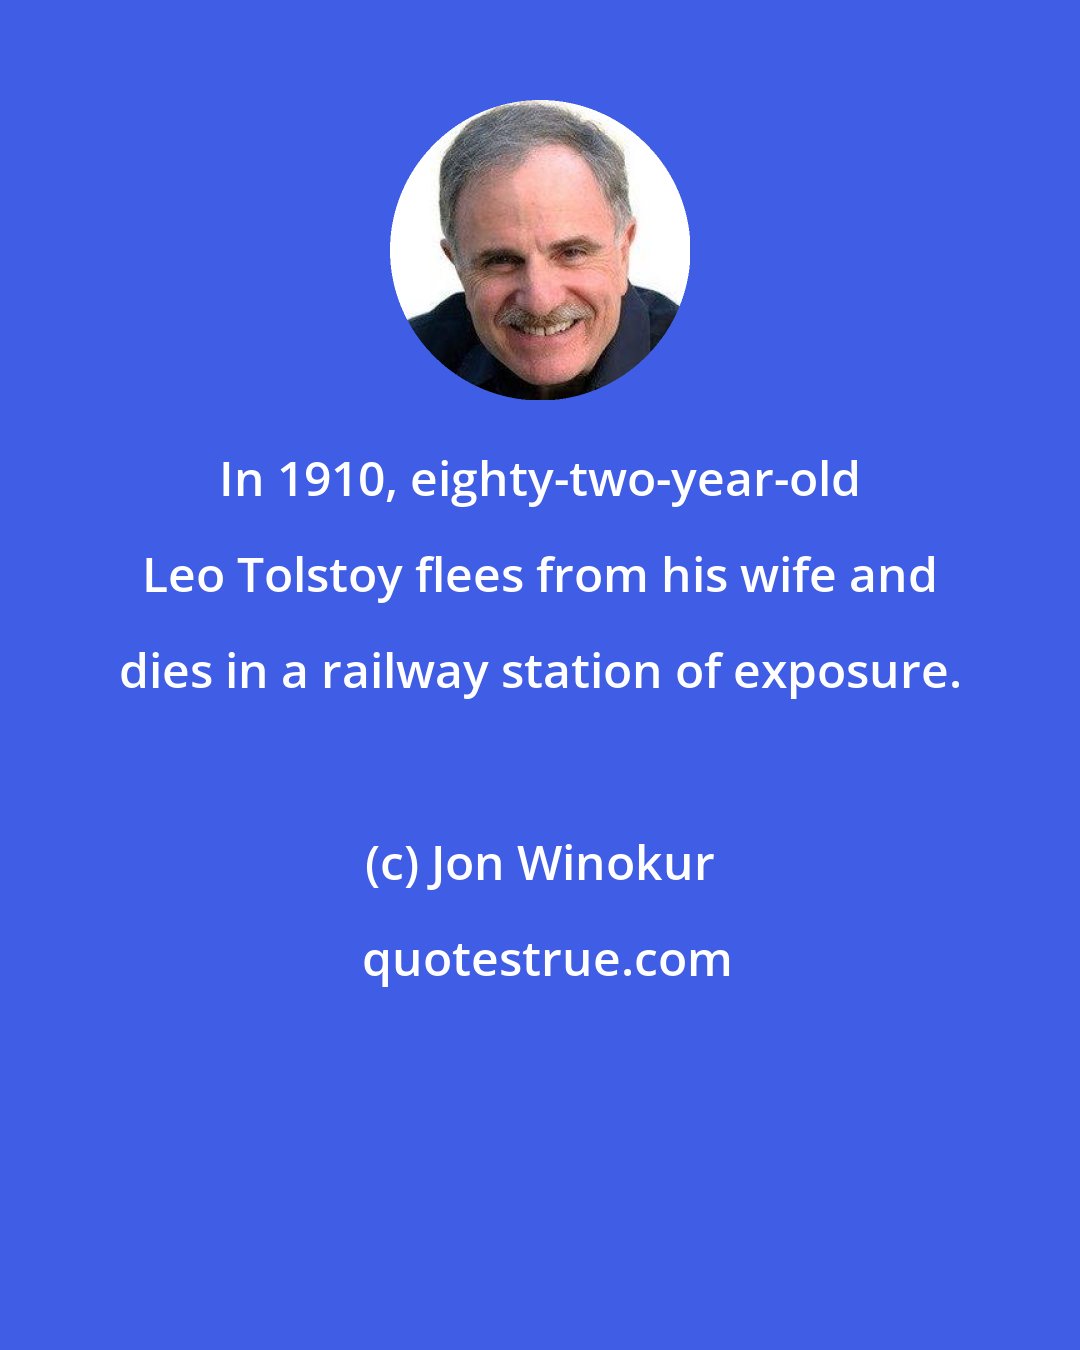 Jon Winokur: In 1910, eighty-two-year-old Leo Tolstoy flees from his wife and dies in a railway station of exposure.